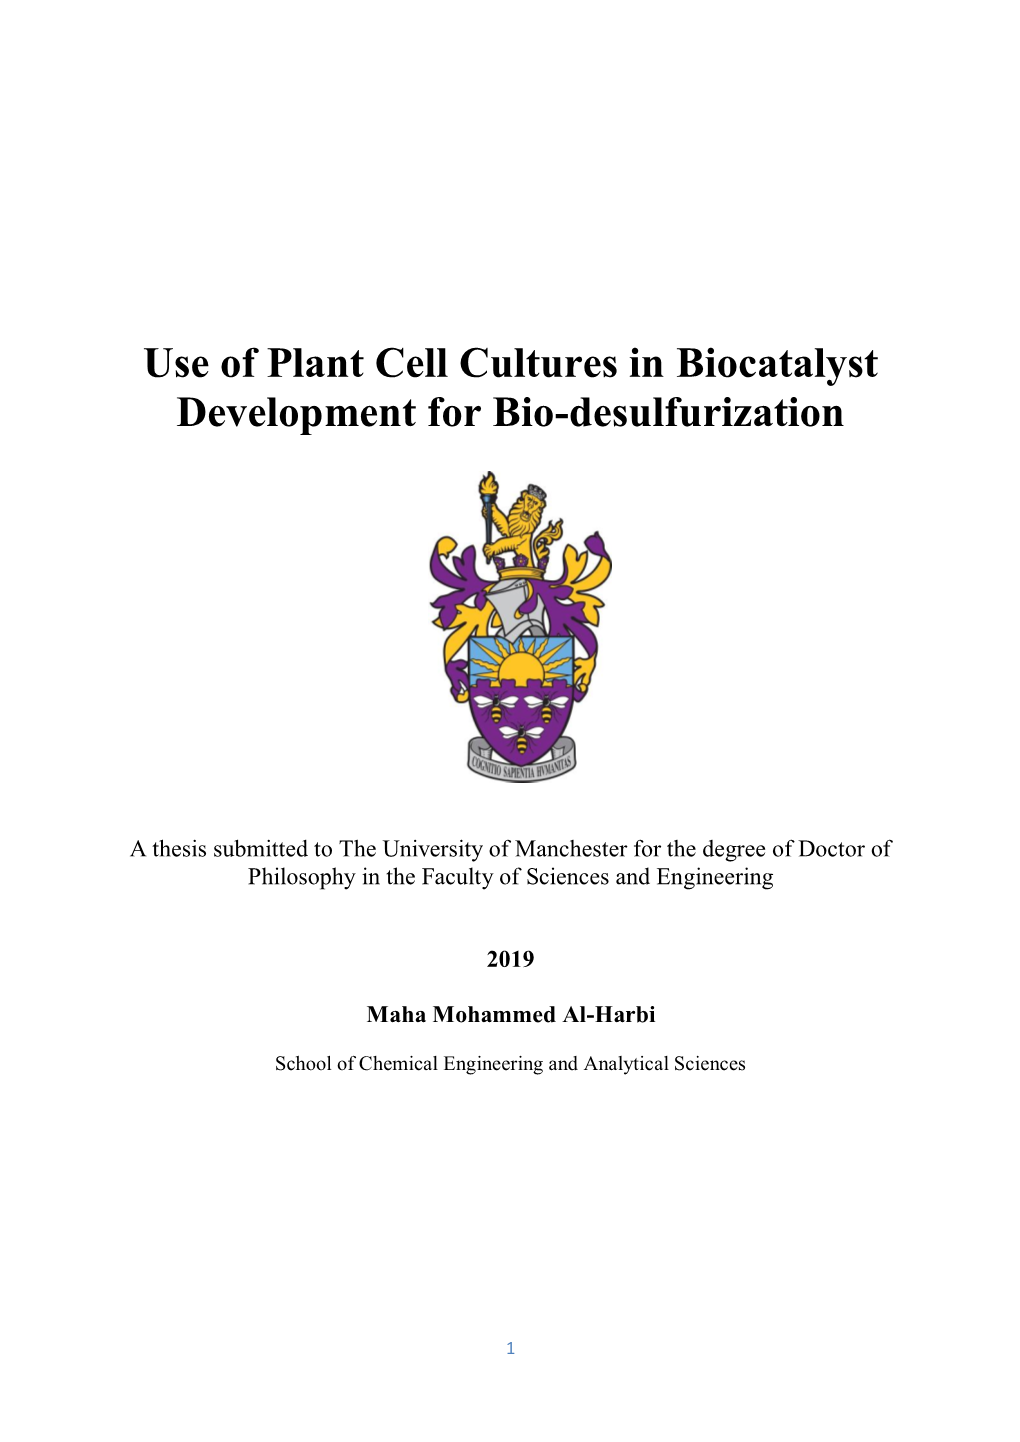 Use of Plant Cell Cultures in Biocatalyst Development for Bio-Desulfurization